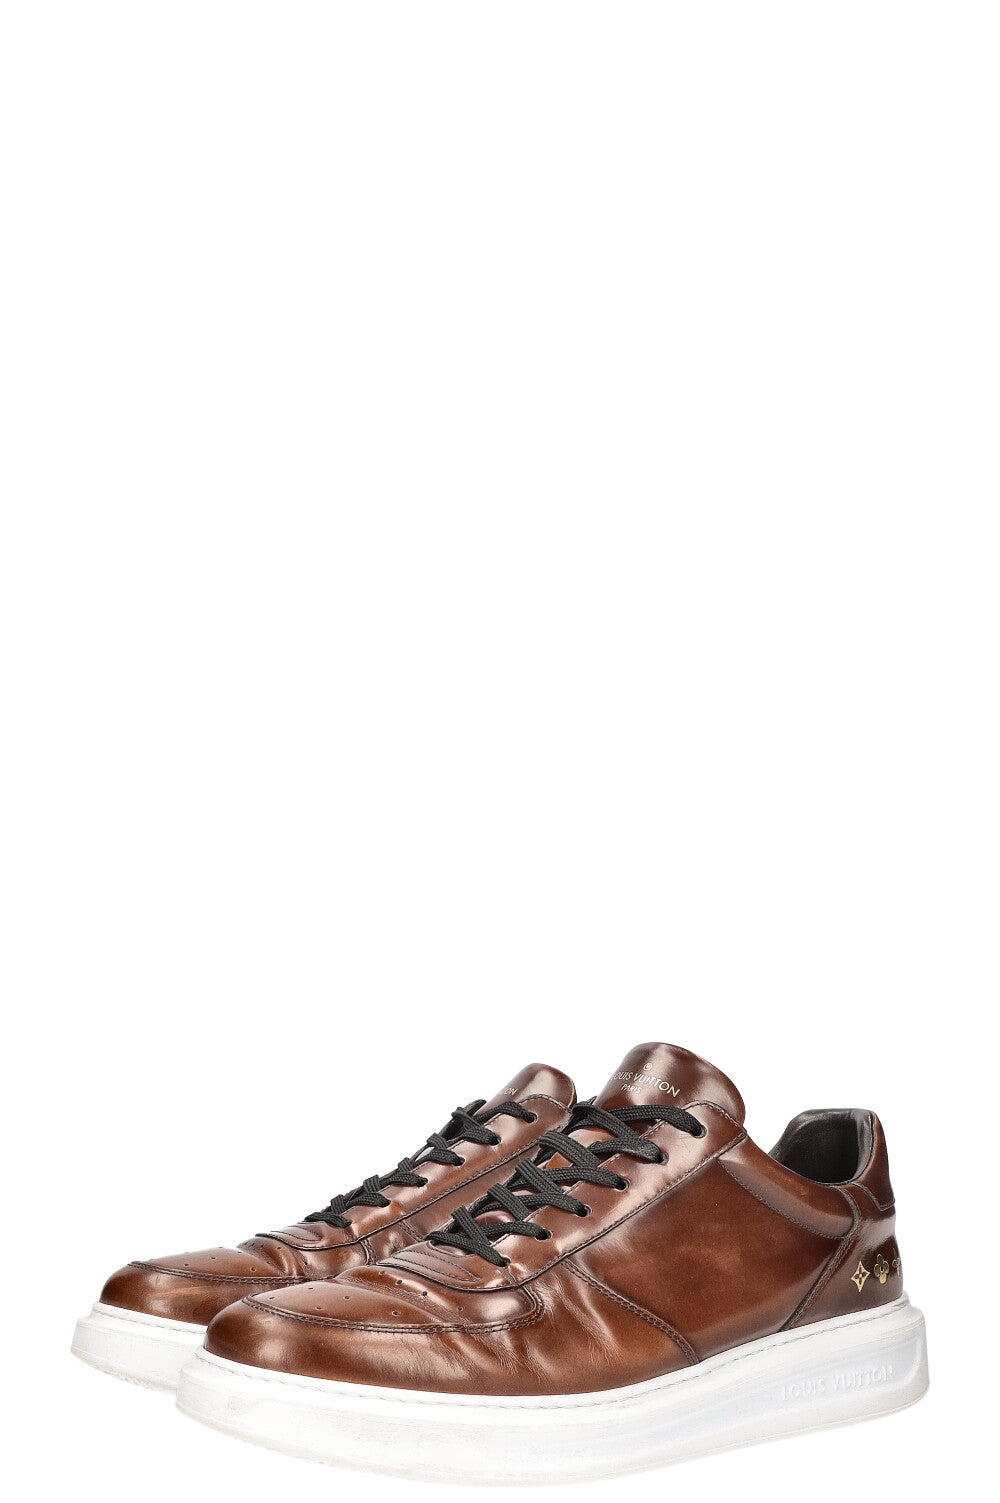 LOUIS VUITTON Beverly Hills Sneakers Brown